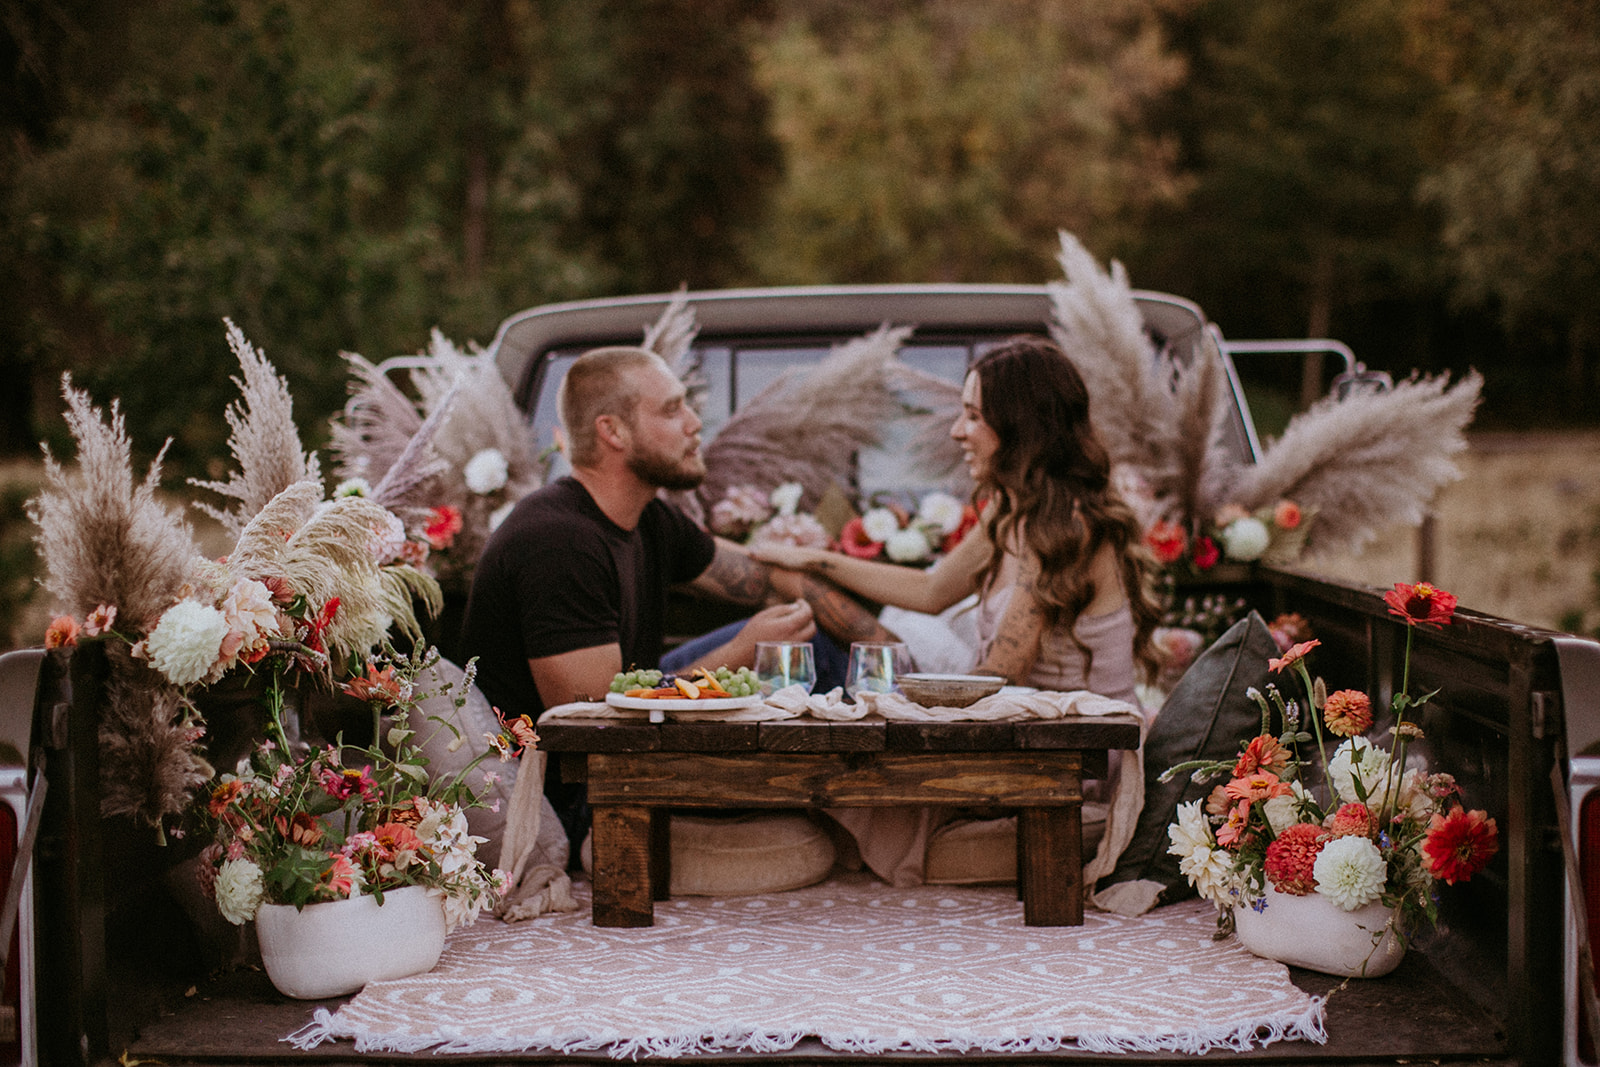 Couple enjoying a picnic in the bed of his truck for tailgate date with florals